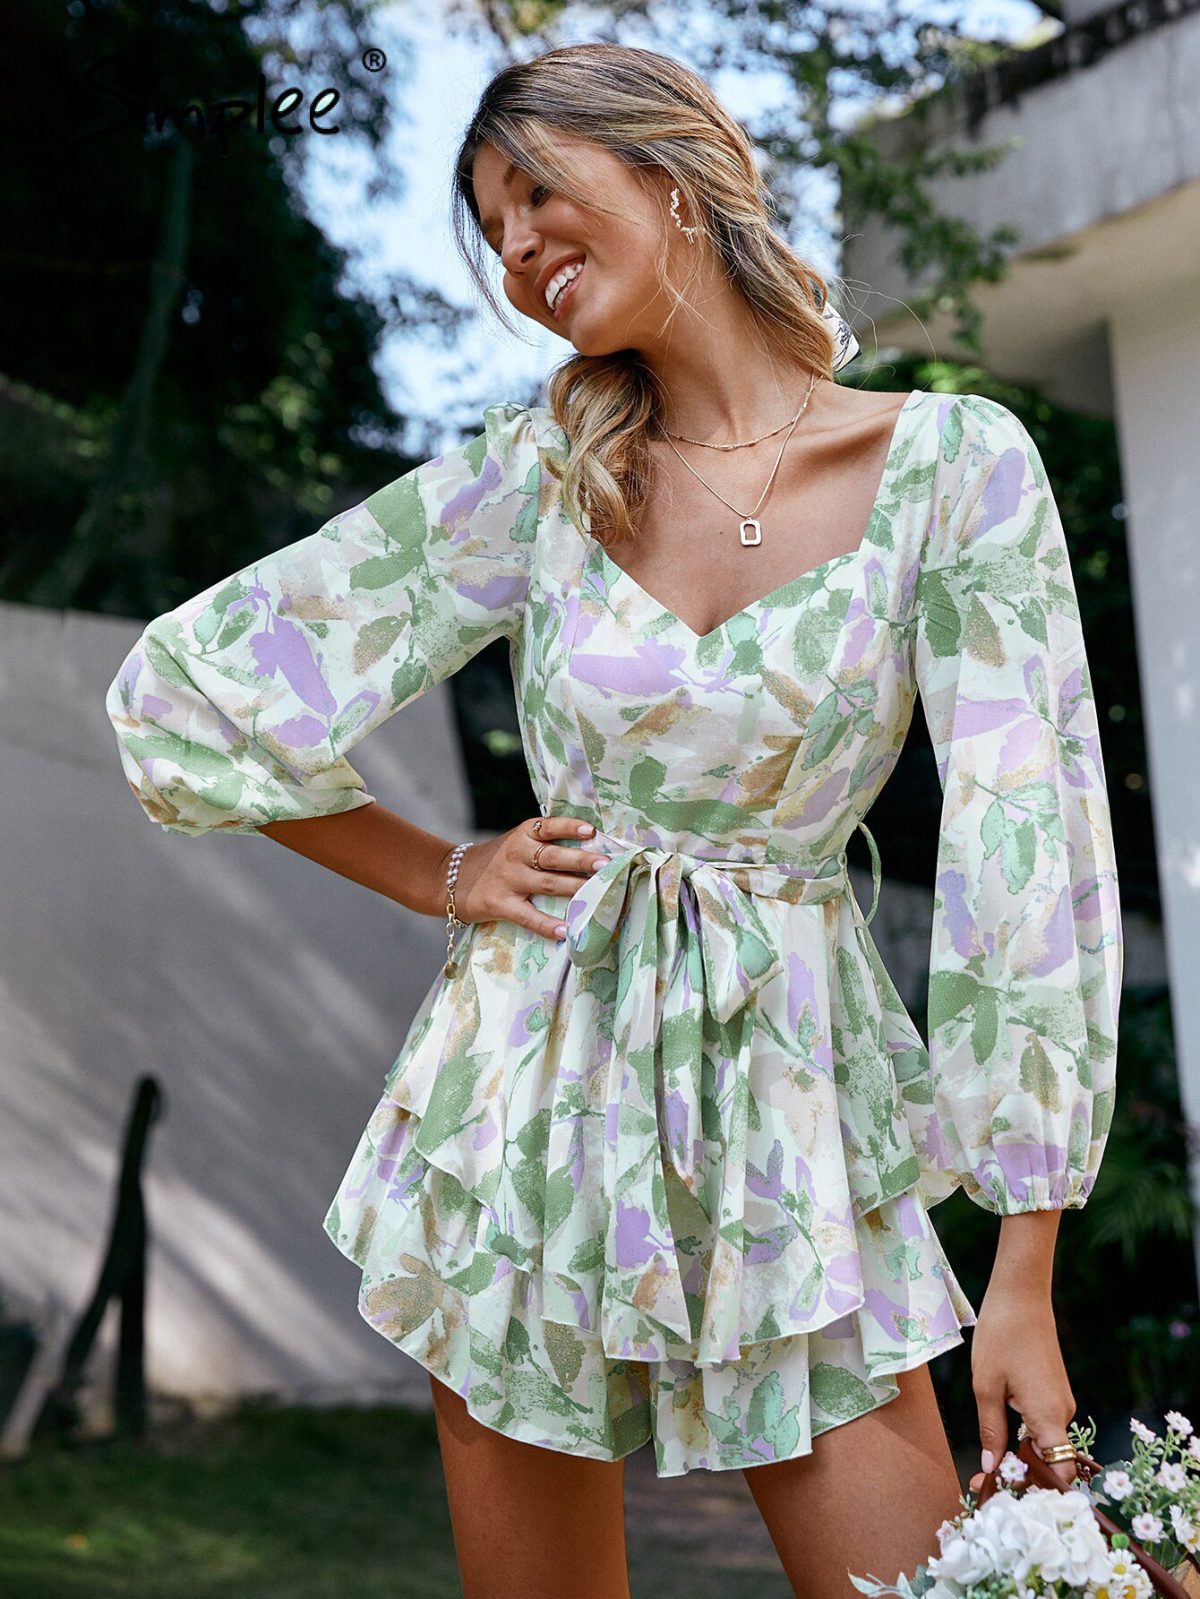 Sash Long Sleeve Ruffle Print Lace Up Floral A-Line V-Neck Romper Jumpsuit in Jumpsuits & Rompers